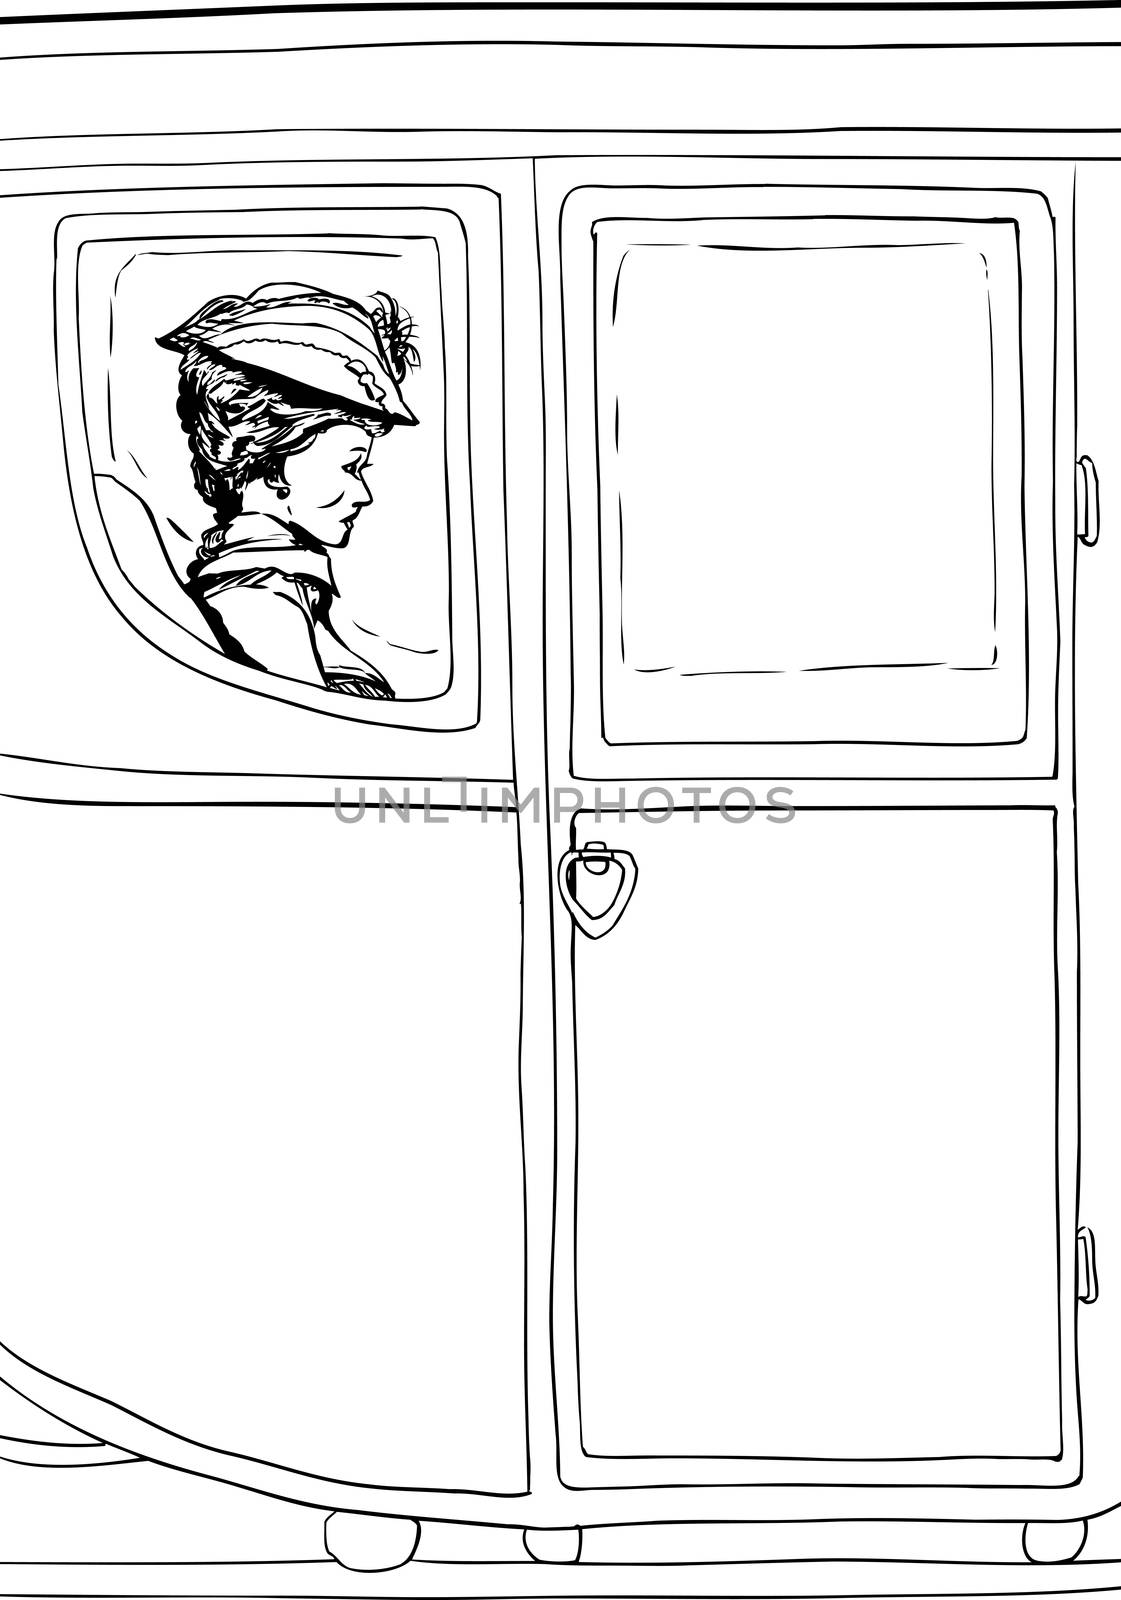 Outline of woman seated in fancy 18th century carriage by TheBlackRhino